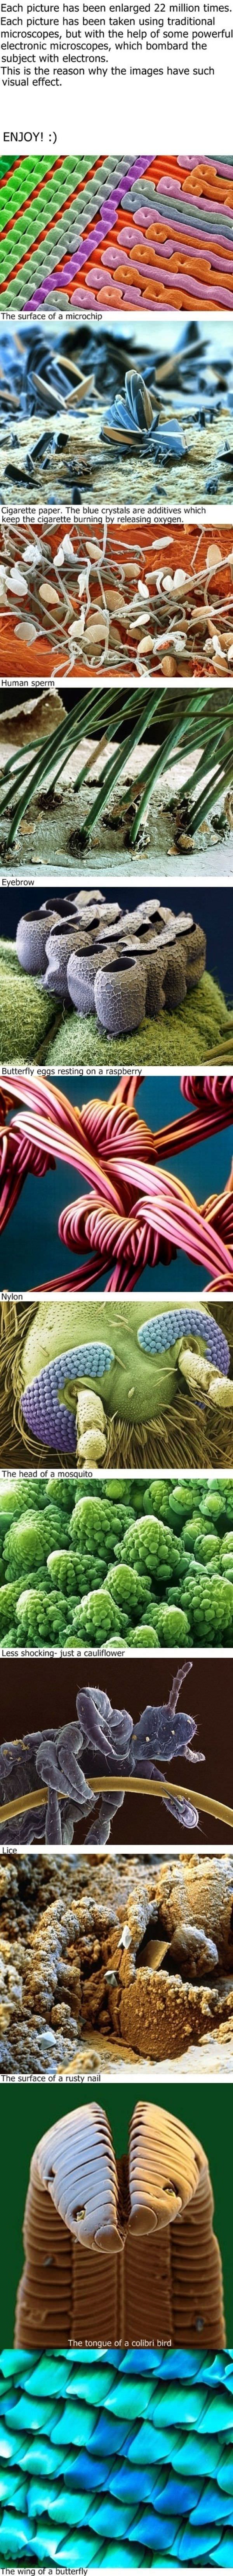 Cool Microscope Pictures